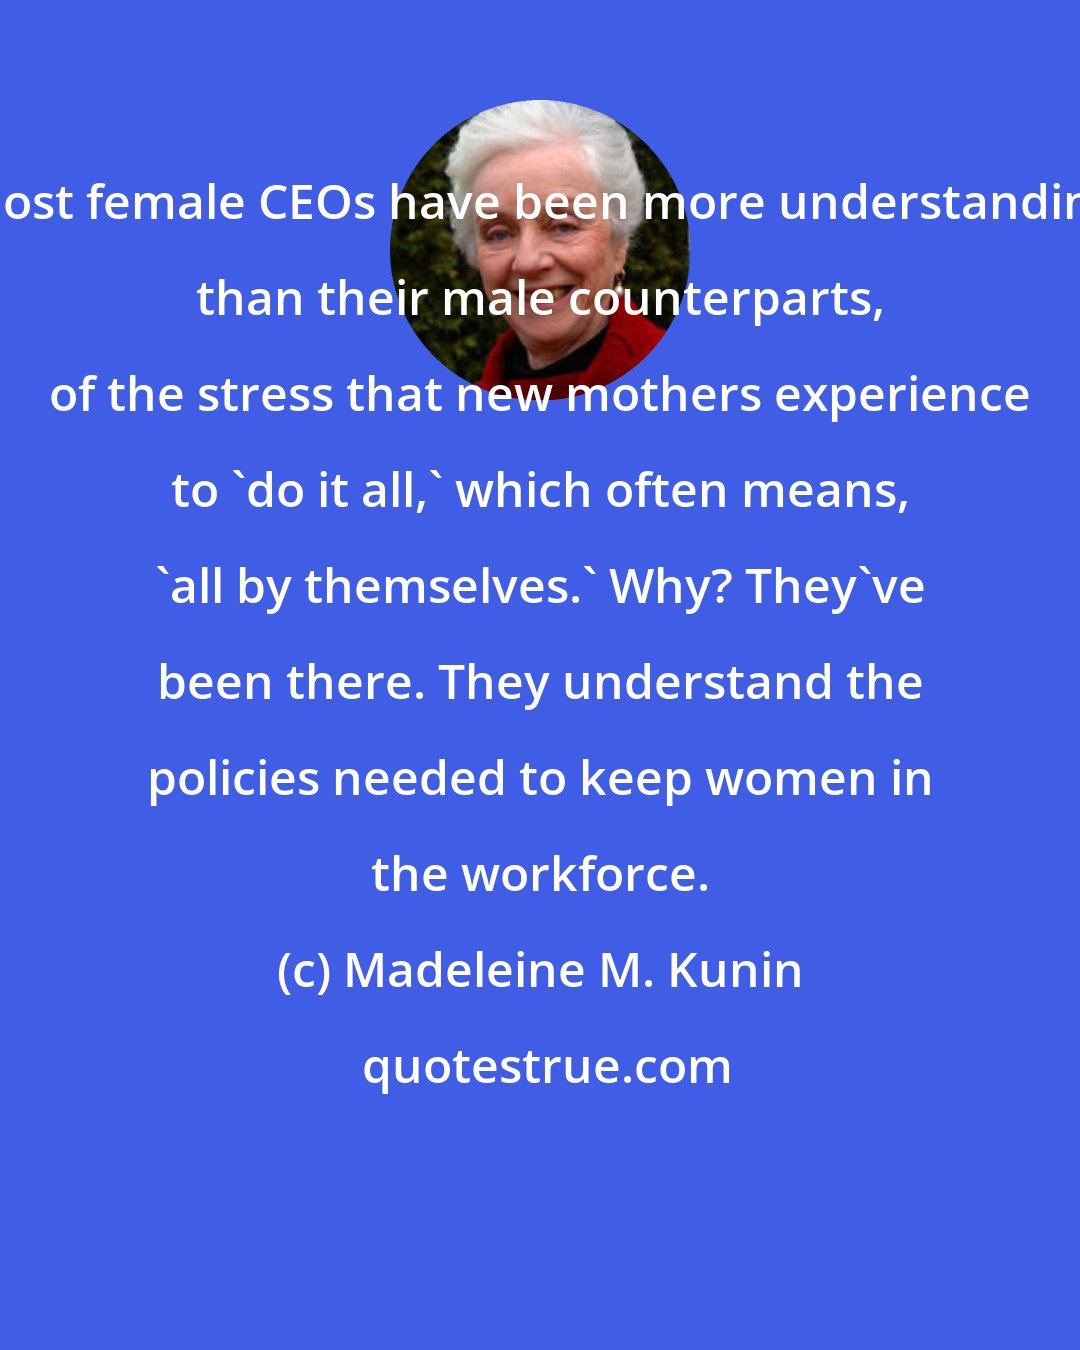 Madeleine M. Kunin: Most female CEOs have been more understanding than their male counterparts, of the stress that new mothers experience to 'do it all,' which often means, 'all by themselves.' Why? They've been there. They understand the policies needed to keep women in the workforce.